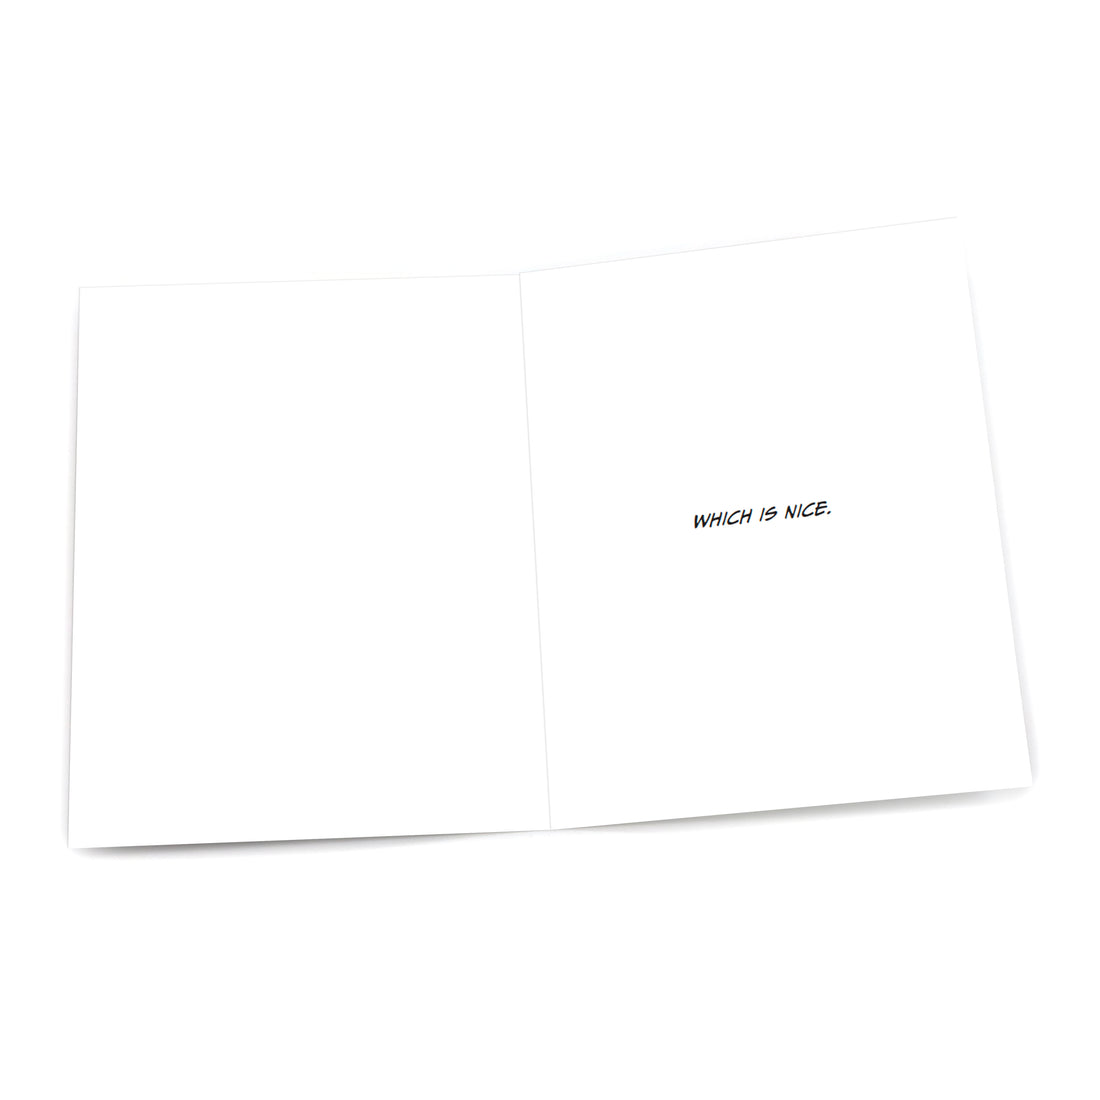 Greeting Card: Pop Life, I love You More Than I Want to Murder You - Pack of 6